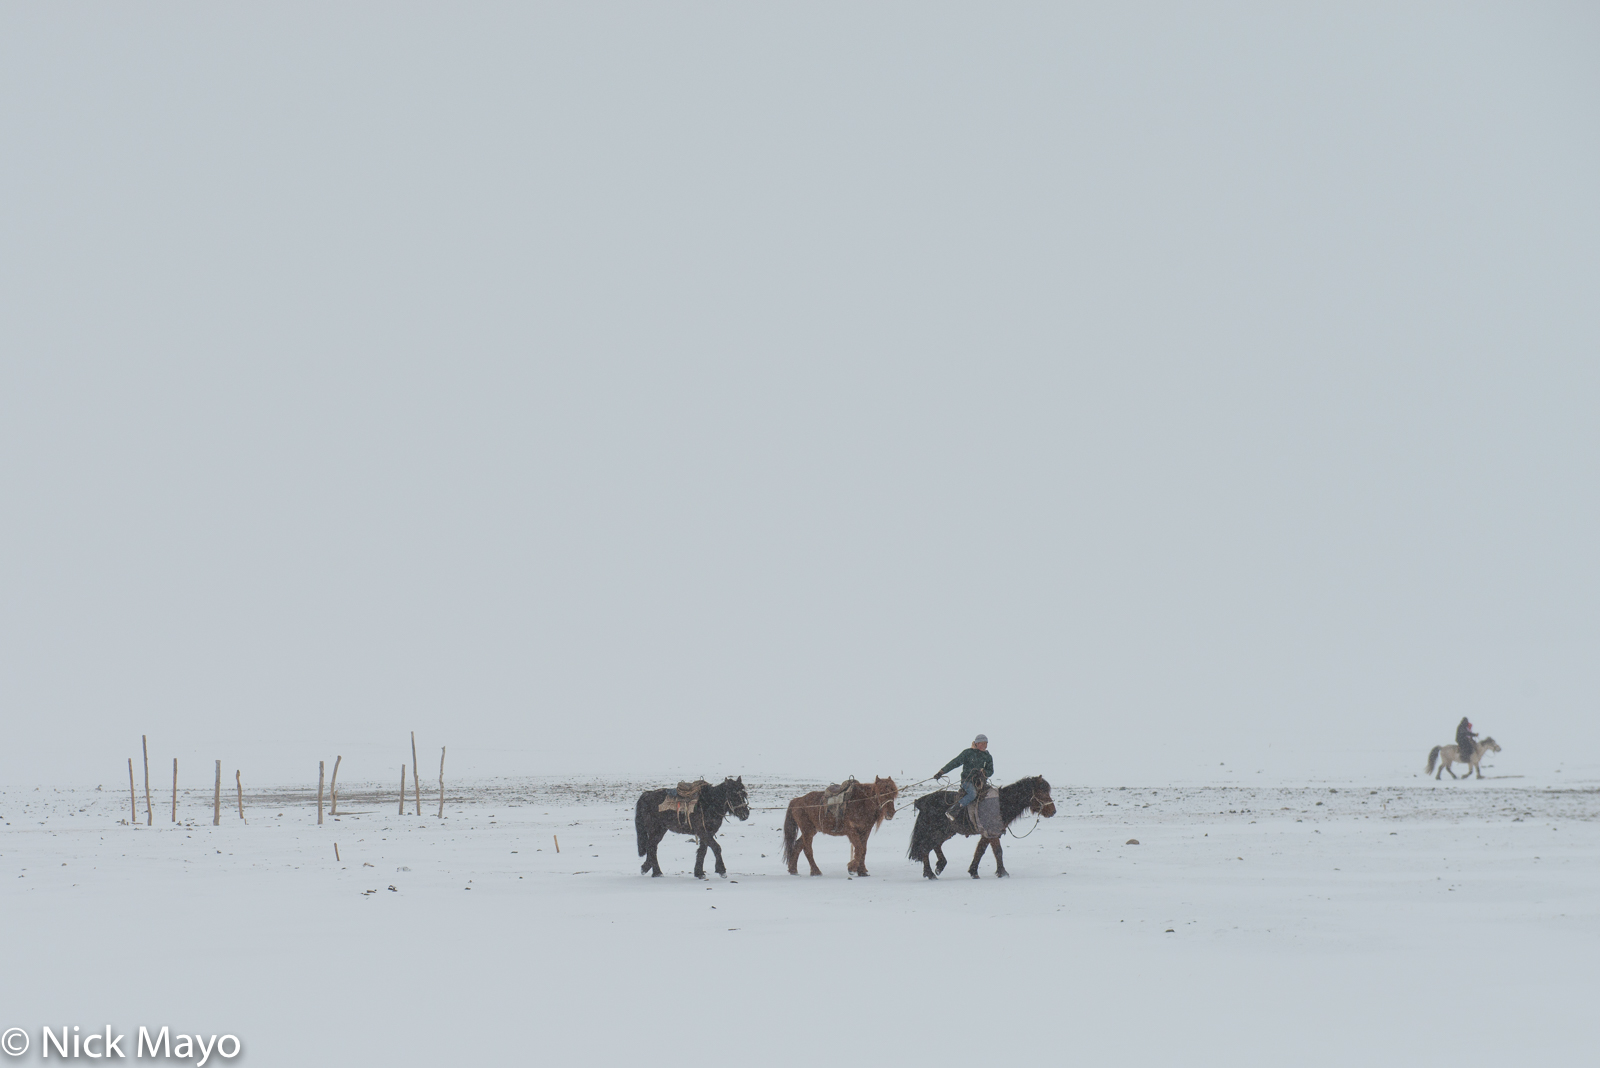 A Kazakh herdsman from Ulaakhus sum leads his horses to shelter during a snow storm.